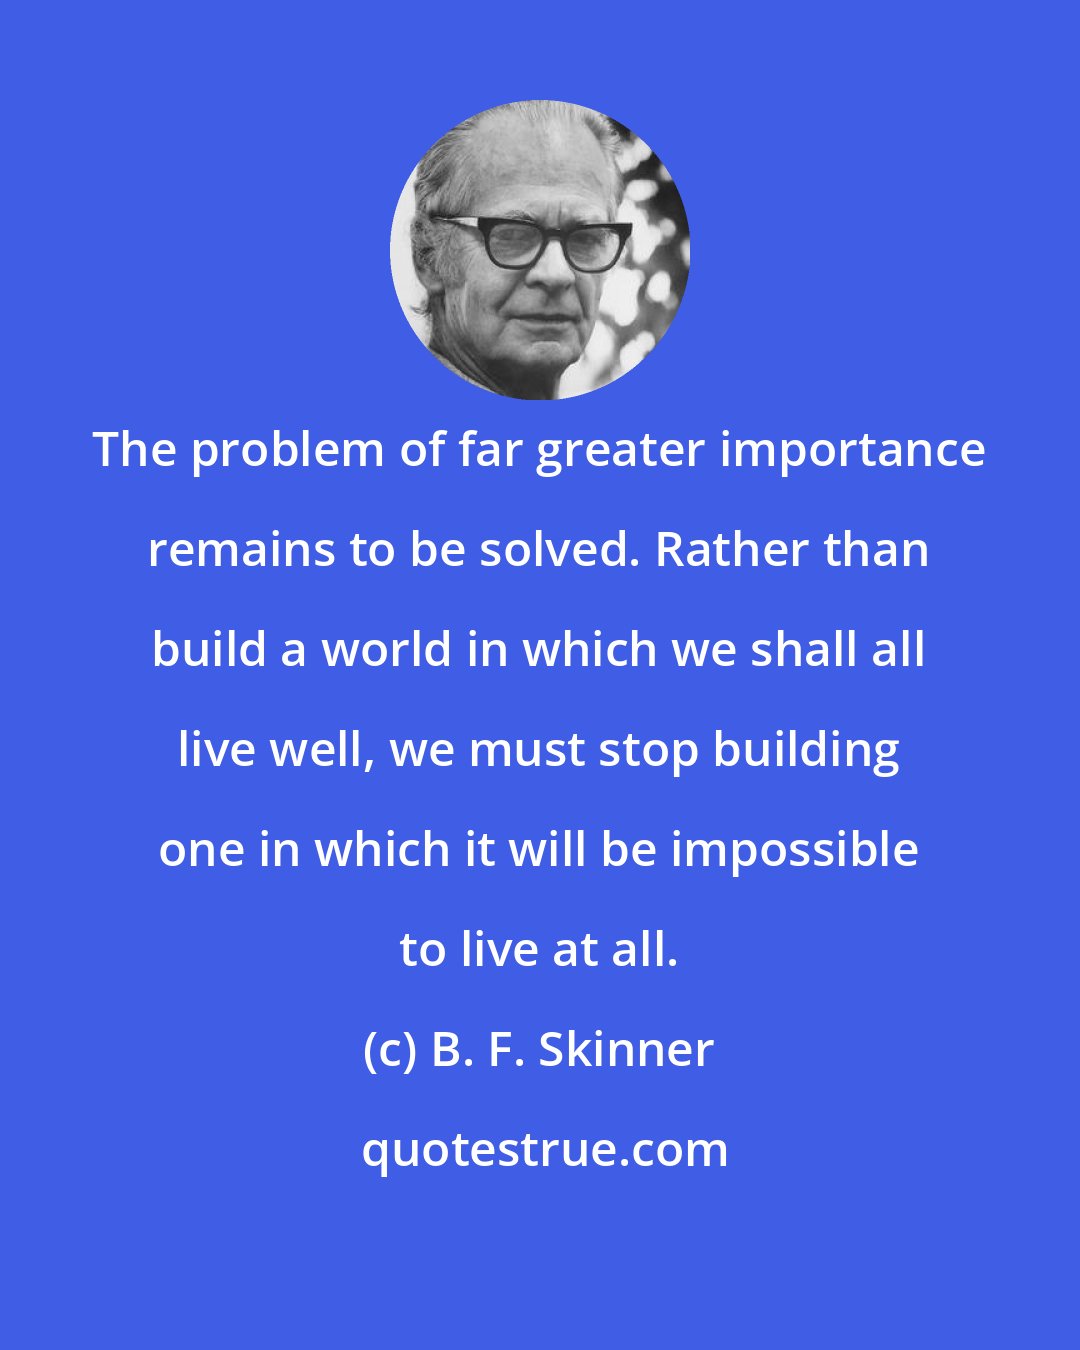 B. F. Skinner: The problem of far greater importance remains to be solved. Rather than build a world in which we shall all live well, we must stop building one in which it will be impossible to live at all.